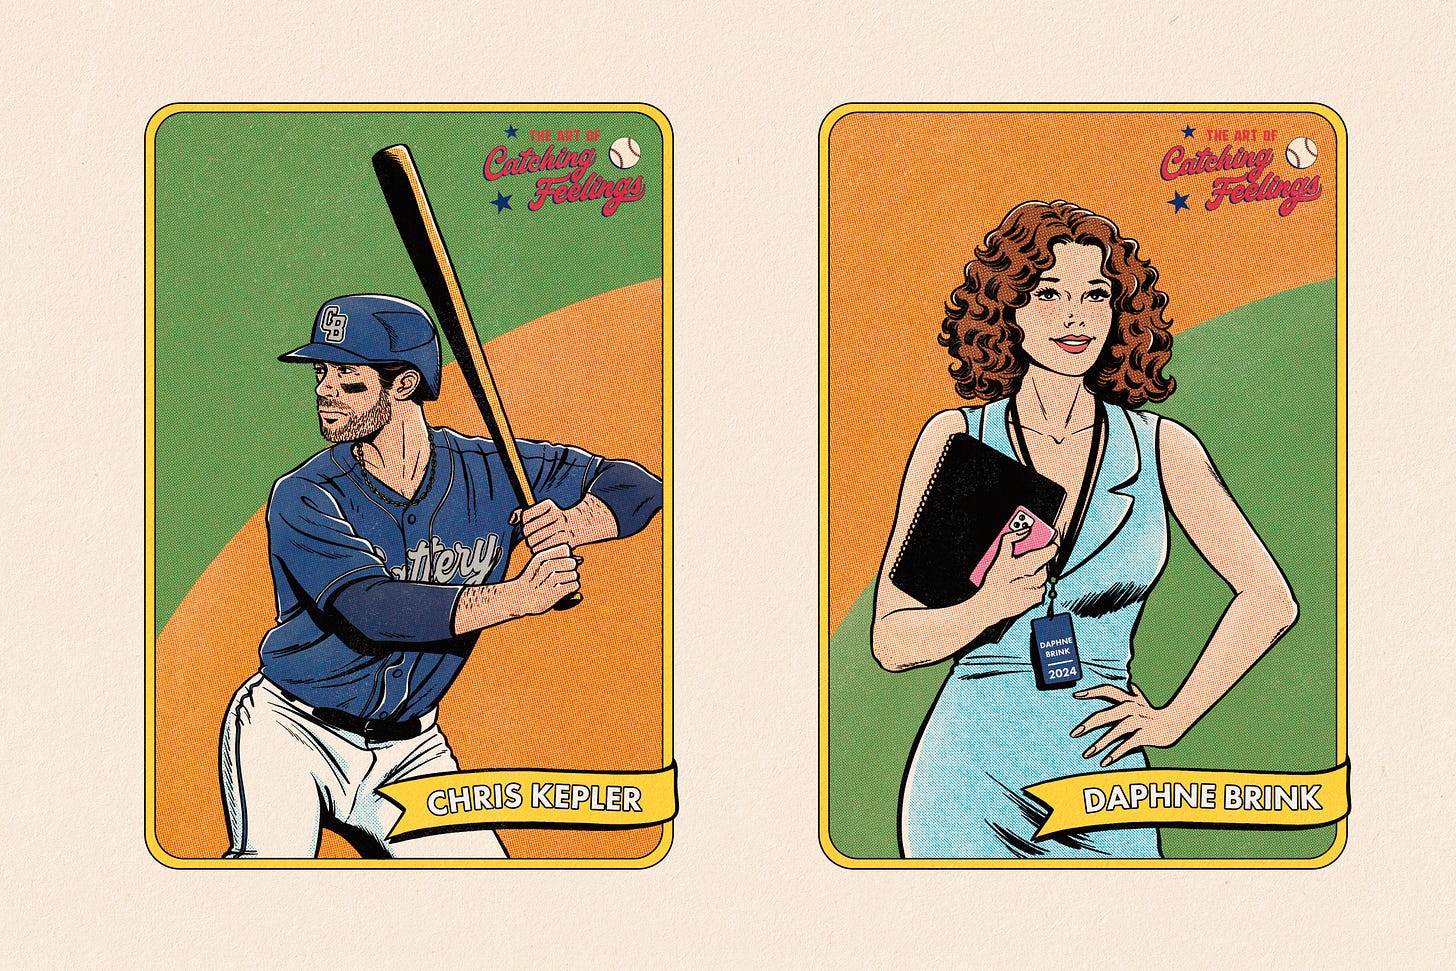 Two illustrated  baseball cards; one on the left of Chris Kepler wearing his navy Battery uniform in an at bat where he grips the bat with his bare hands, he has eye black on his cheekbones, a bit of scruff, a batting helmet that says CB. The one on the right is Daphne Brink in her full reporter get-up -- light-blue dress, a badge around her neck, a notebook and her phone in her hand, curly red-brown hair, a smile.